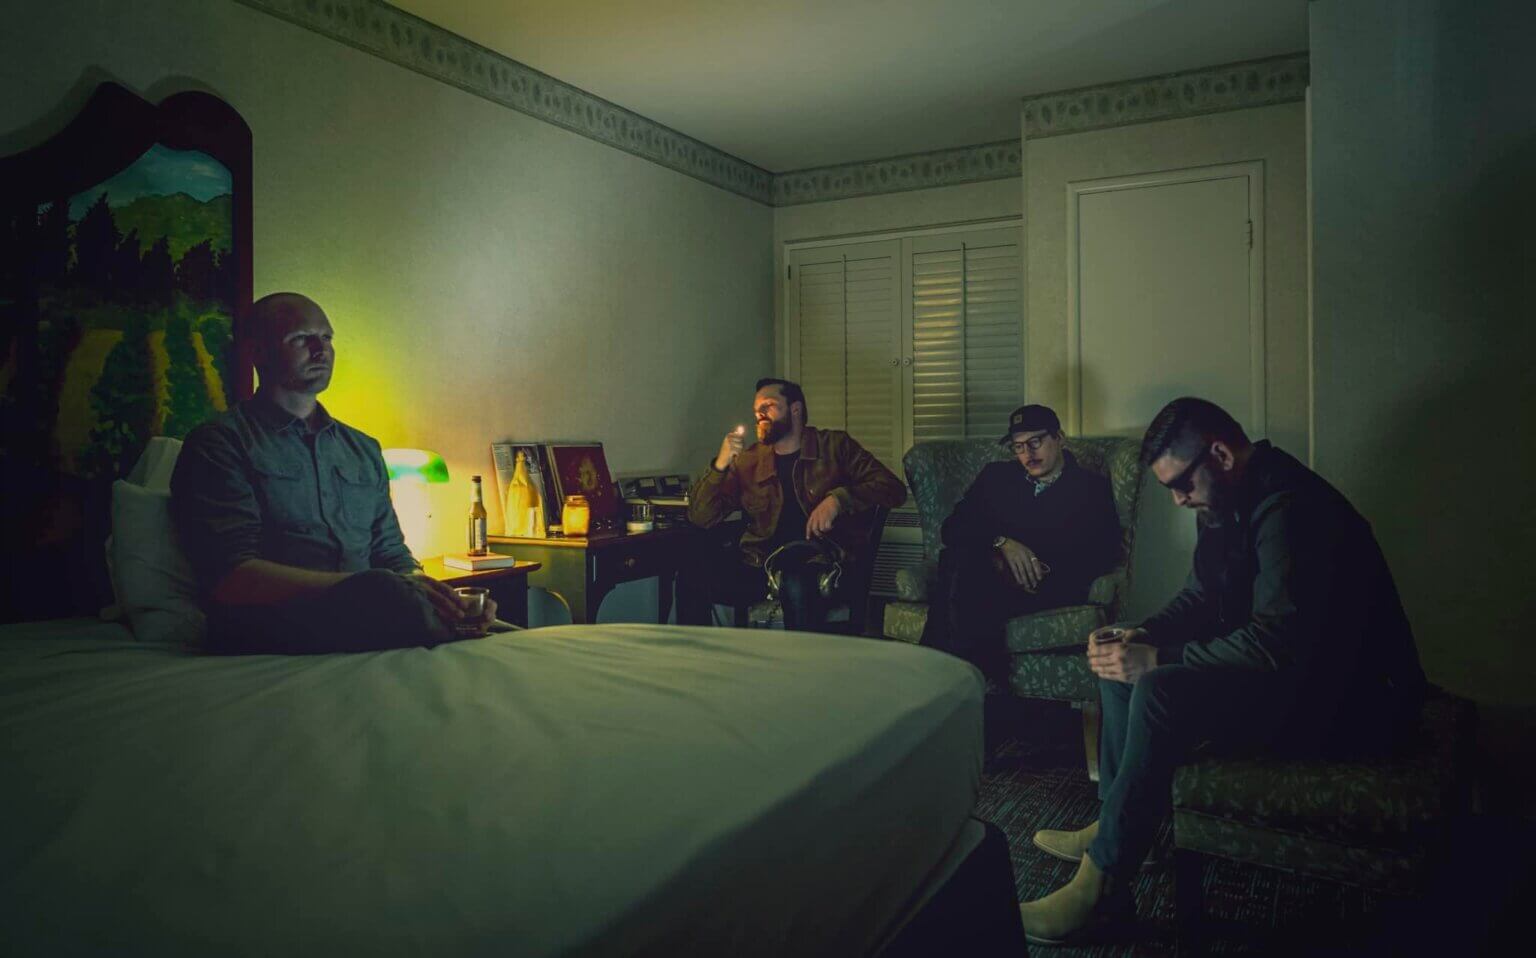 Monophonics interview with Northern Transmissions. Band member Kelly Finnigan chatted with Robert Duguay about the band's Sage Motel and more